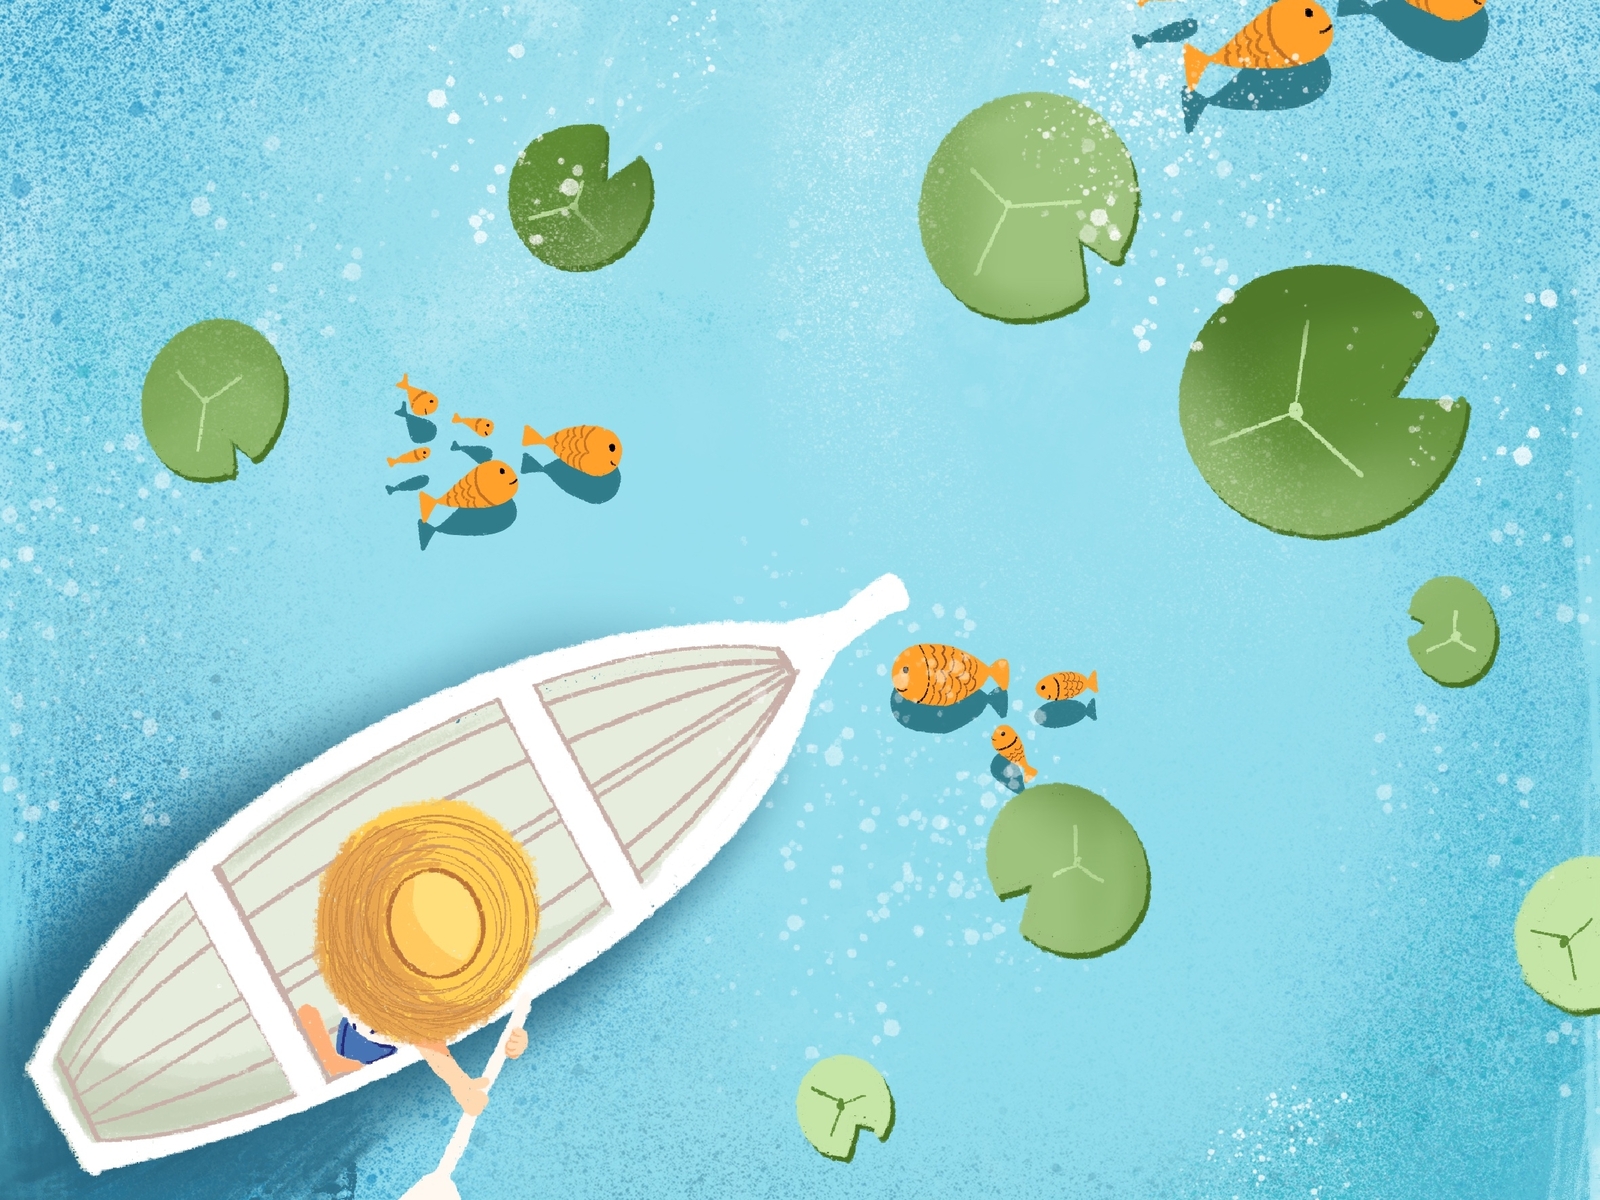 Fisherman by Curious & Hungry on Dribbble